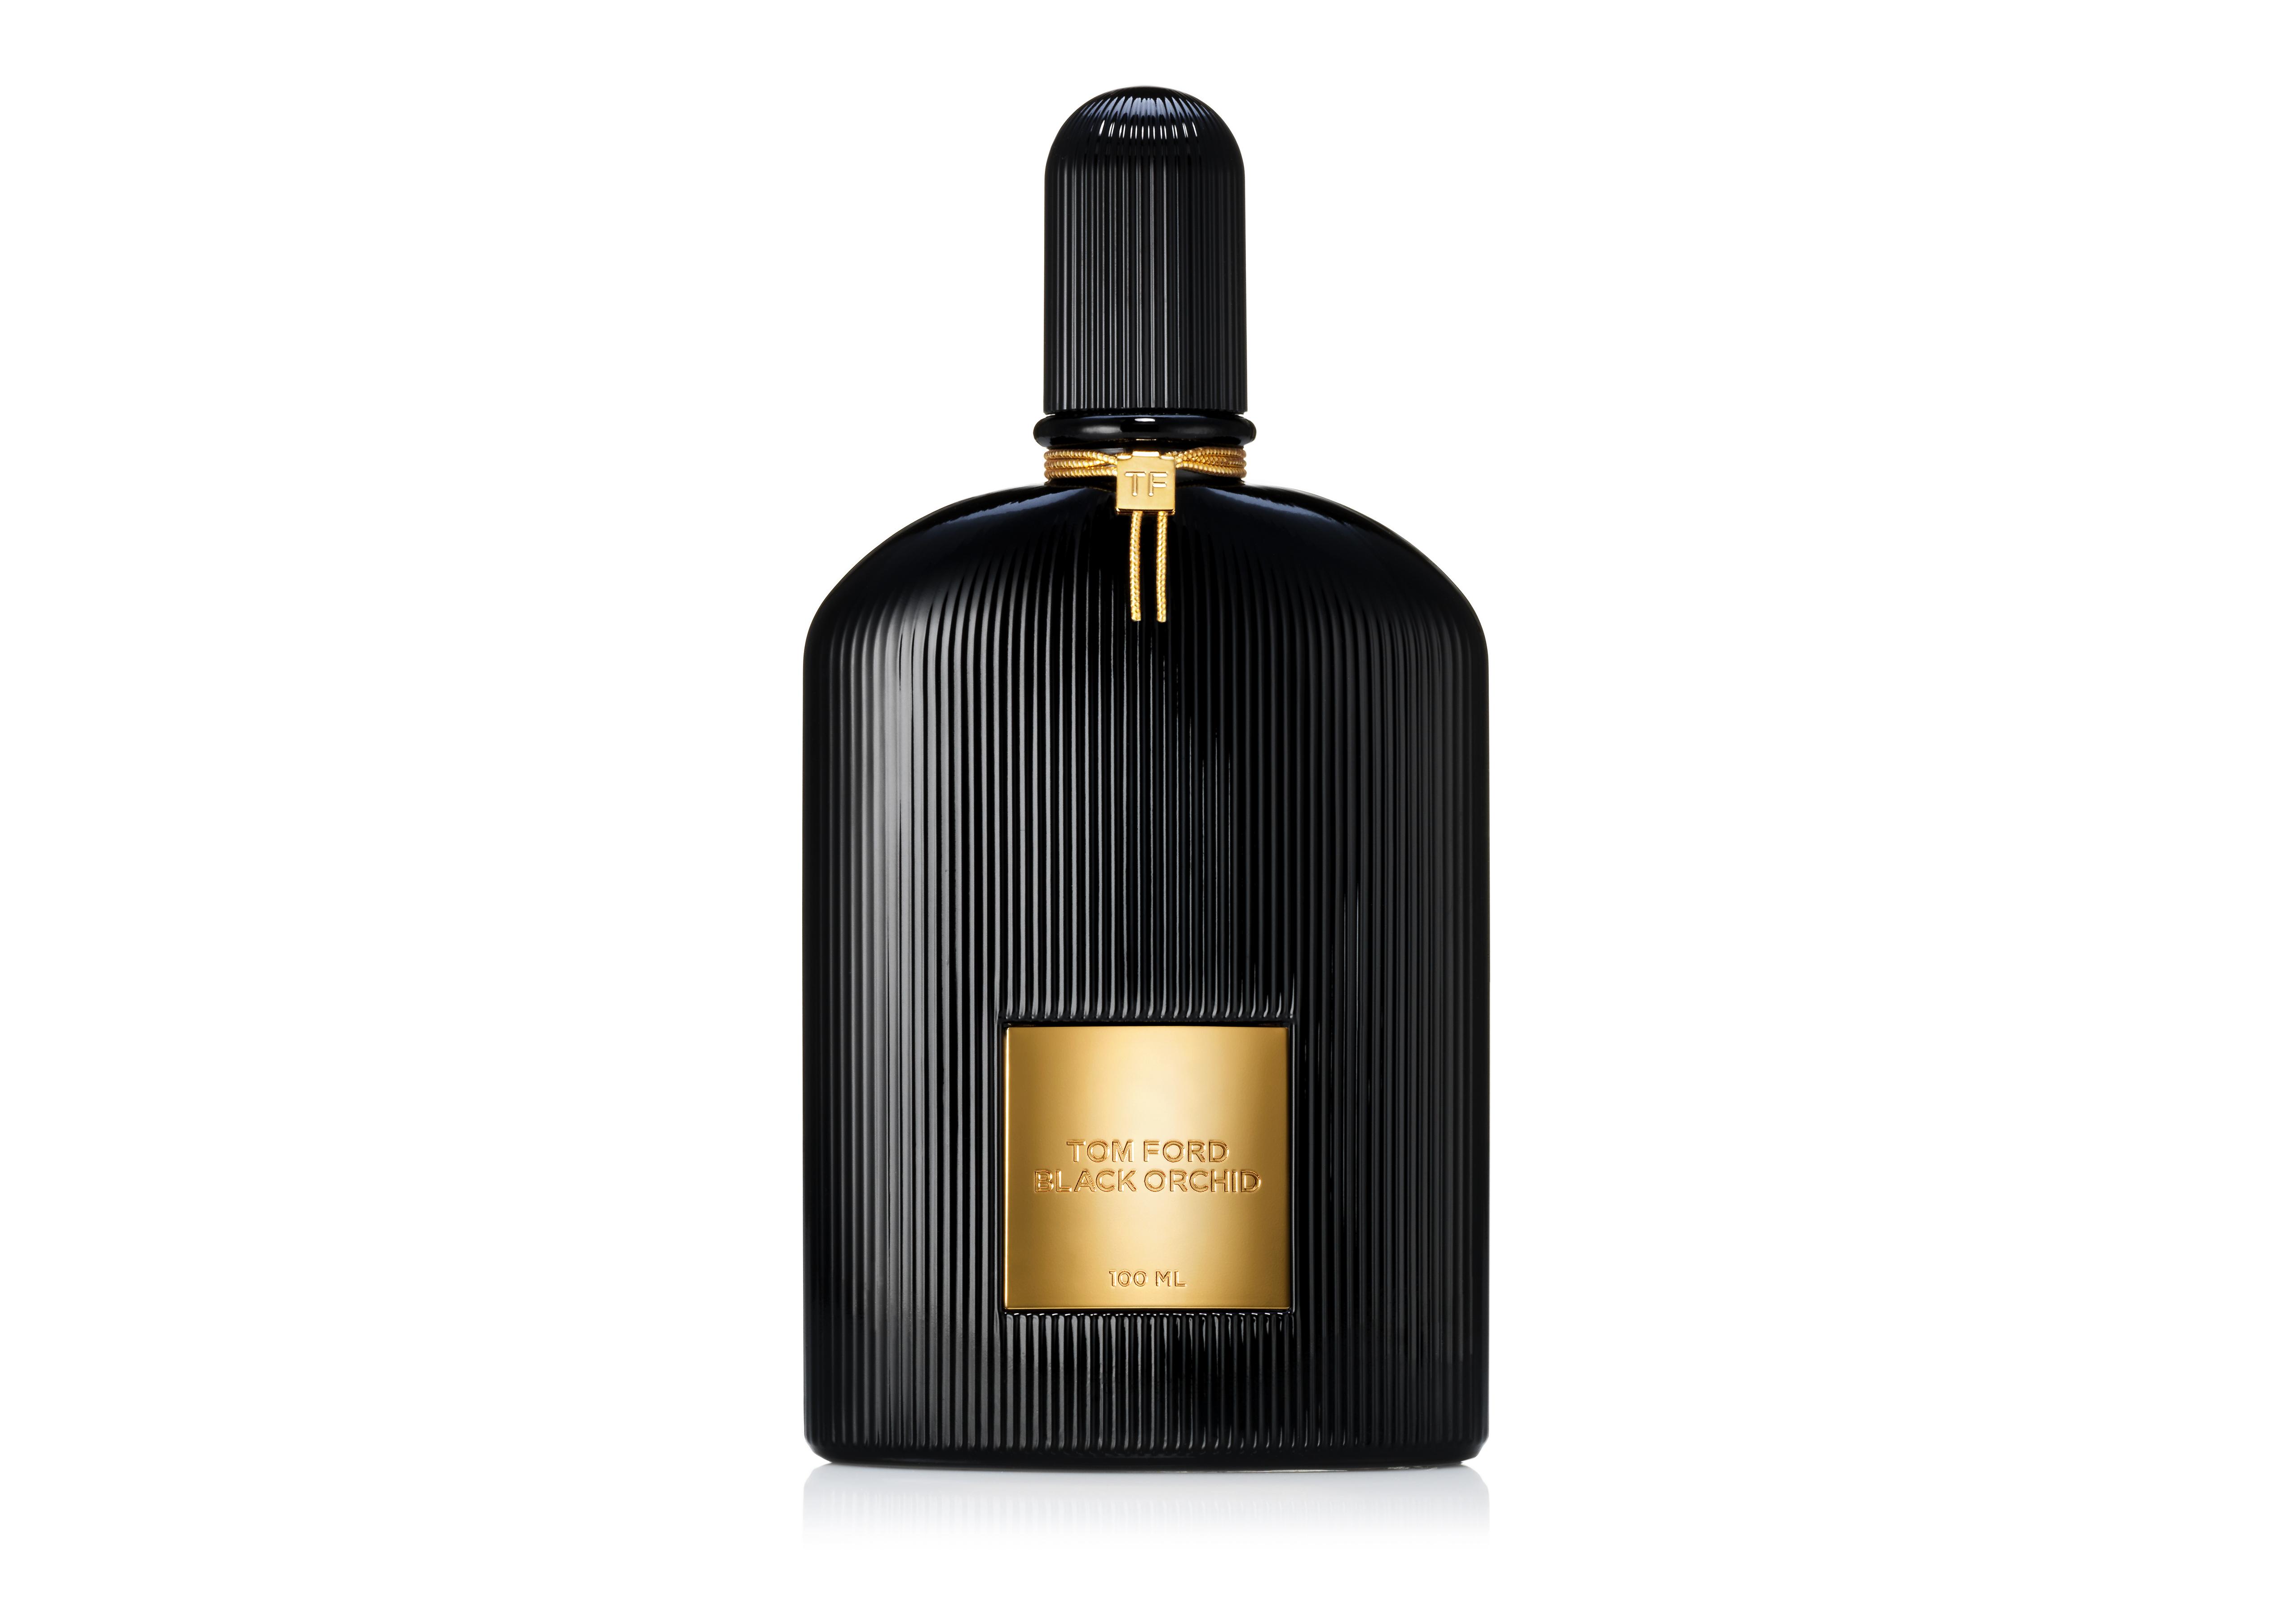 Tom Ford Black Orchid By Tom Ford For Women. Eau De Parfum Spray 3.4-Ounces Black Orchid by Tom Ford 3.4 Fl Oz (Pack of 1)